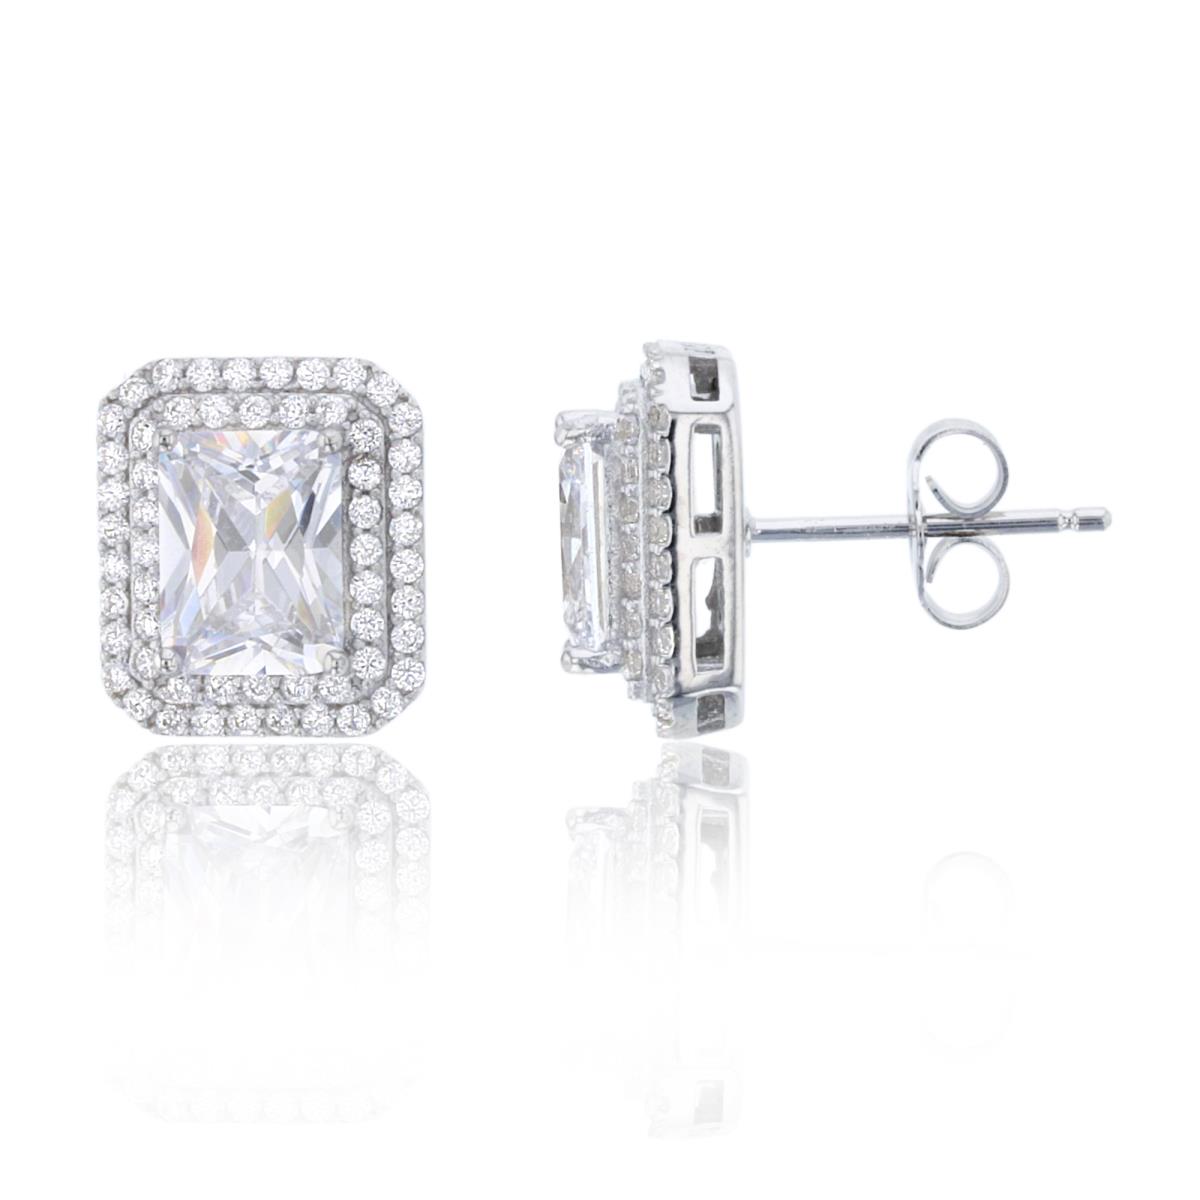 Sterling Silver Rhodium 8x6mm Radiant Cut & Rnd White CZ Double Halo Stud Earring with 10mm Back